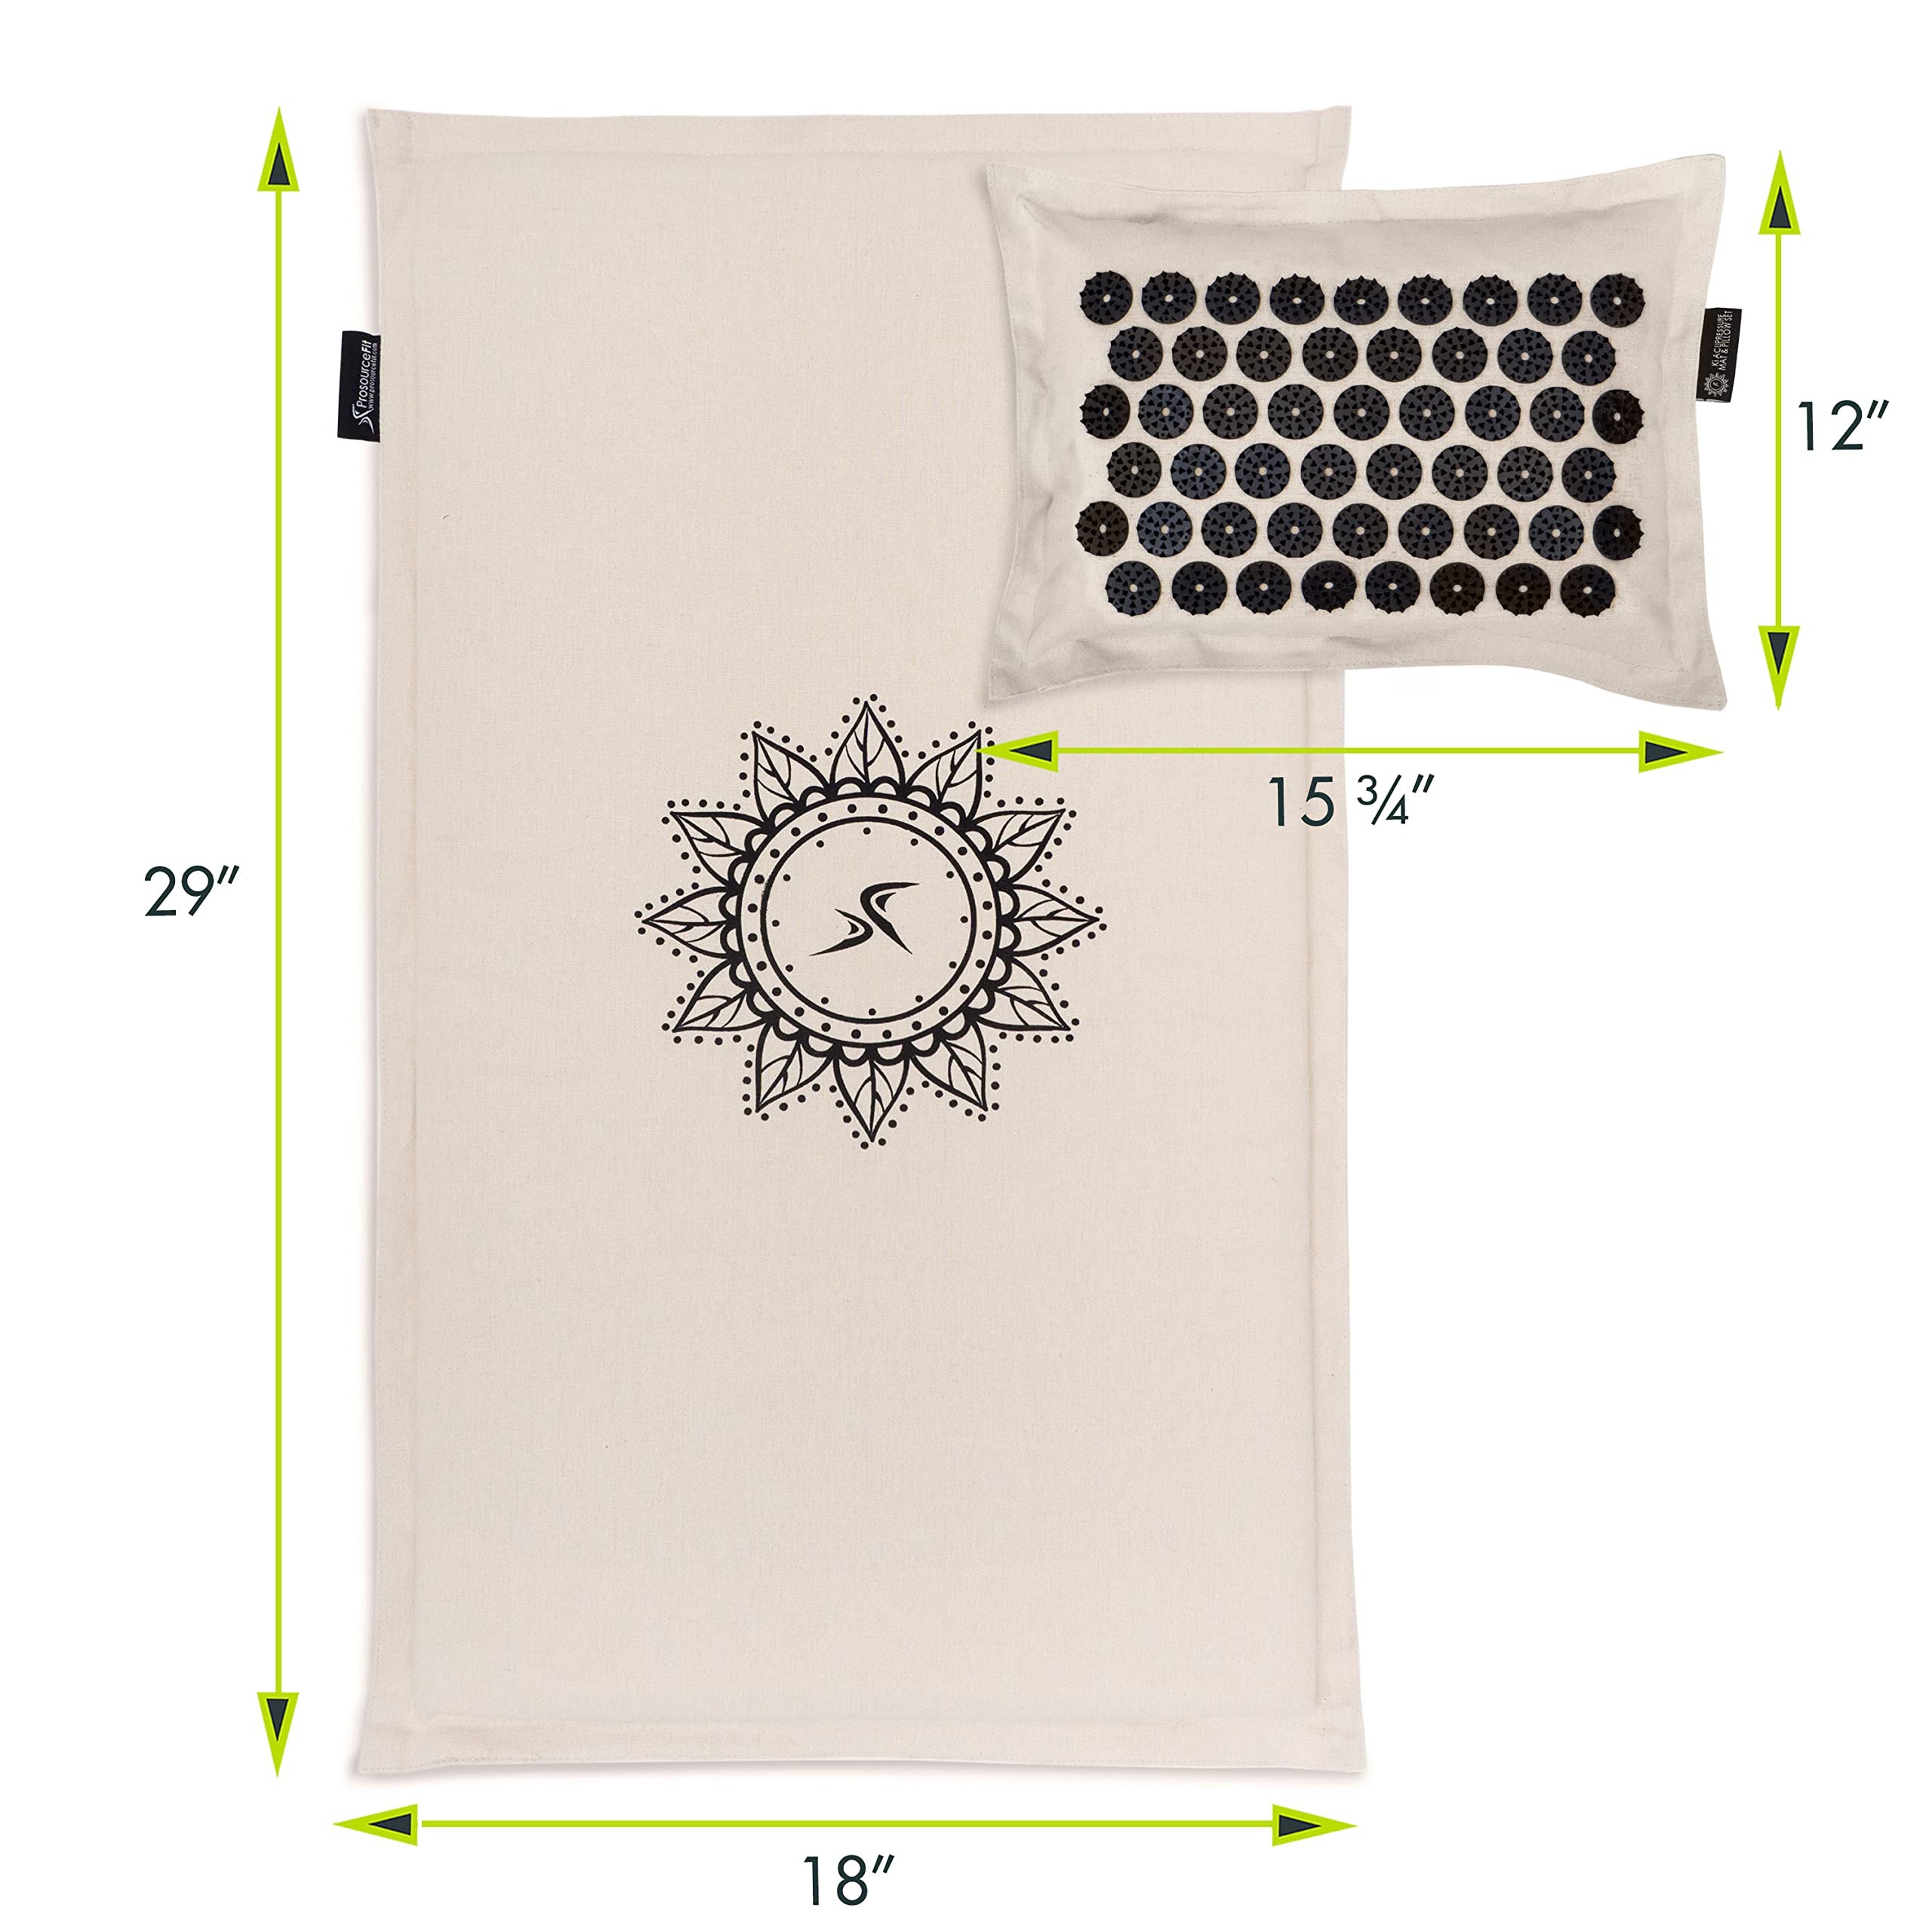 ProsourceFit Ki Acupressure Mat and Pillow Set with 100% Natural Linen for Back/Neck Pain Relief and Muscle Relaxation